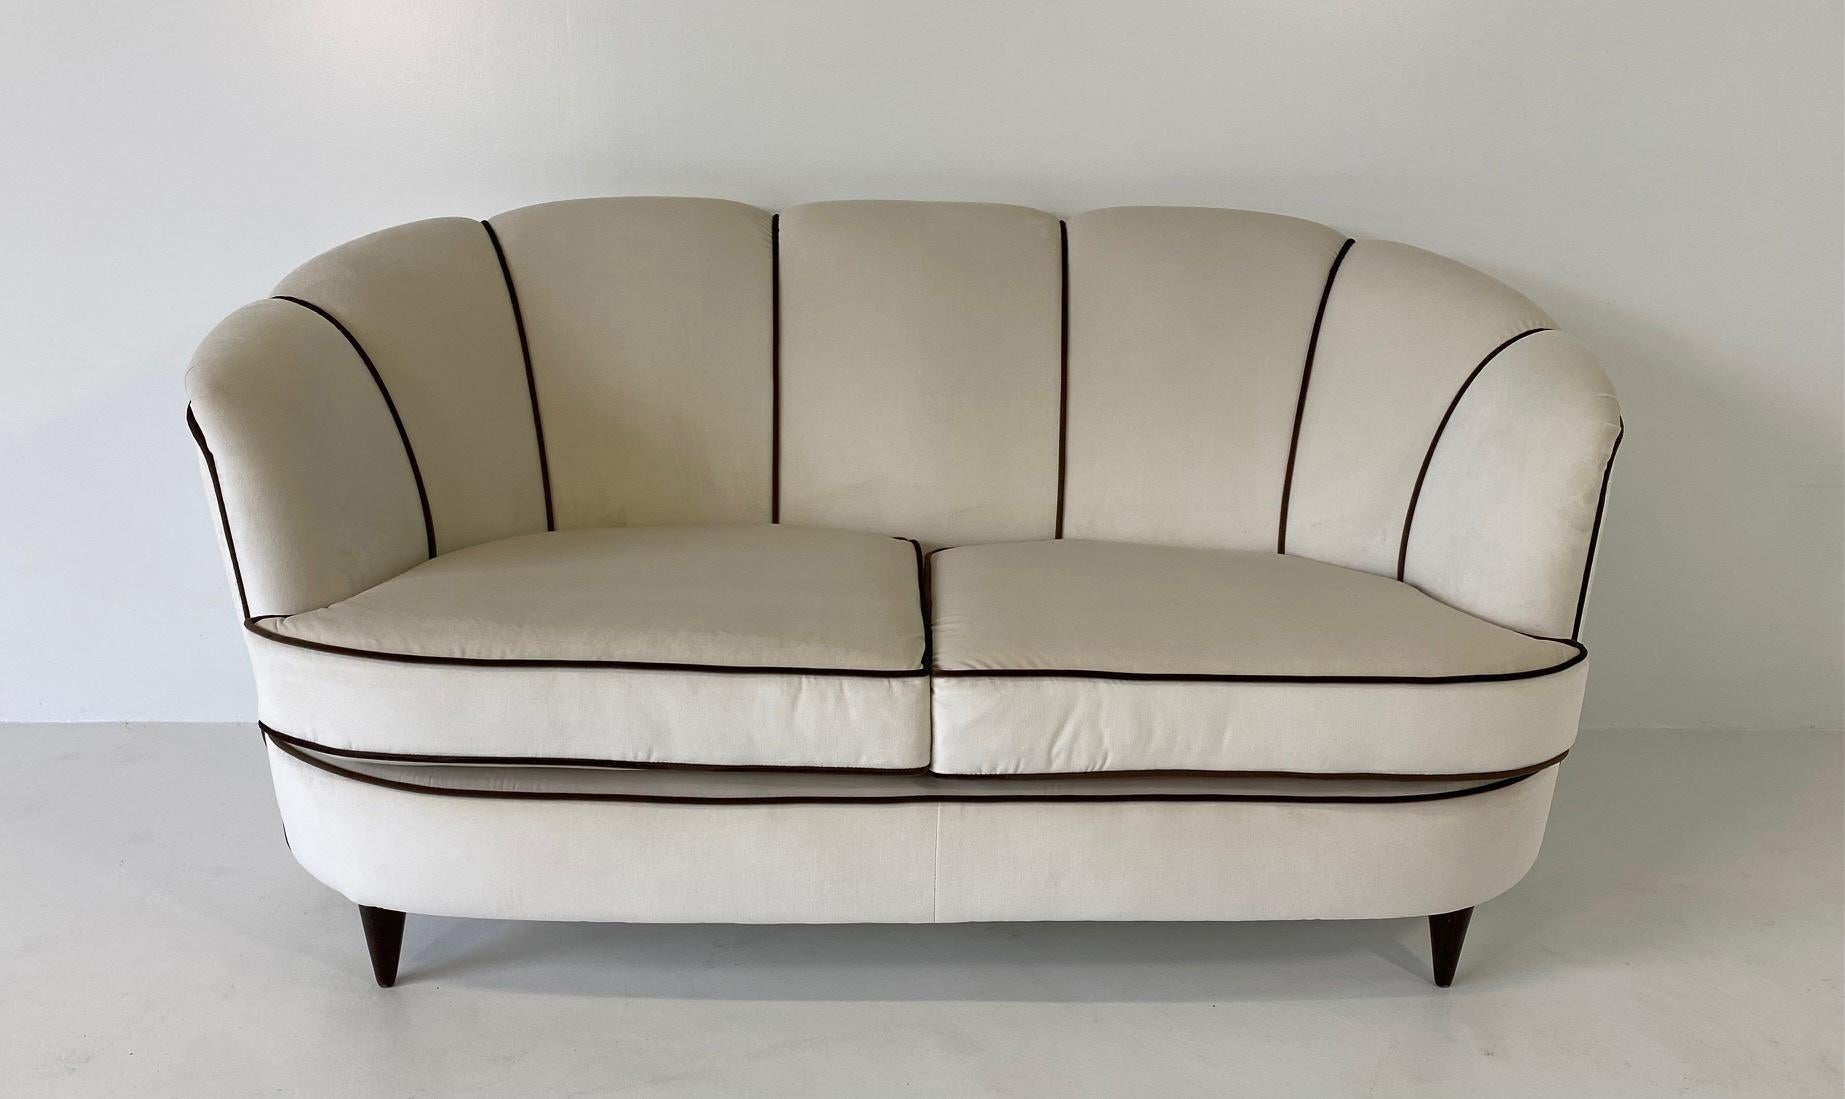 This Art Deco sofa was produced in Italy in the 1940s.

It has been completely restored and reupholstered with and elegant beige velvet and a profile made of brown velvet.